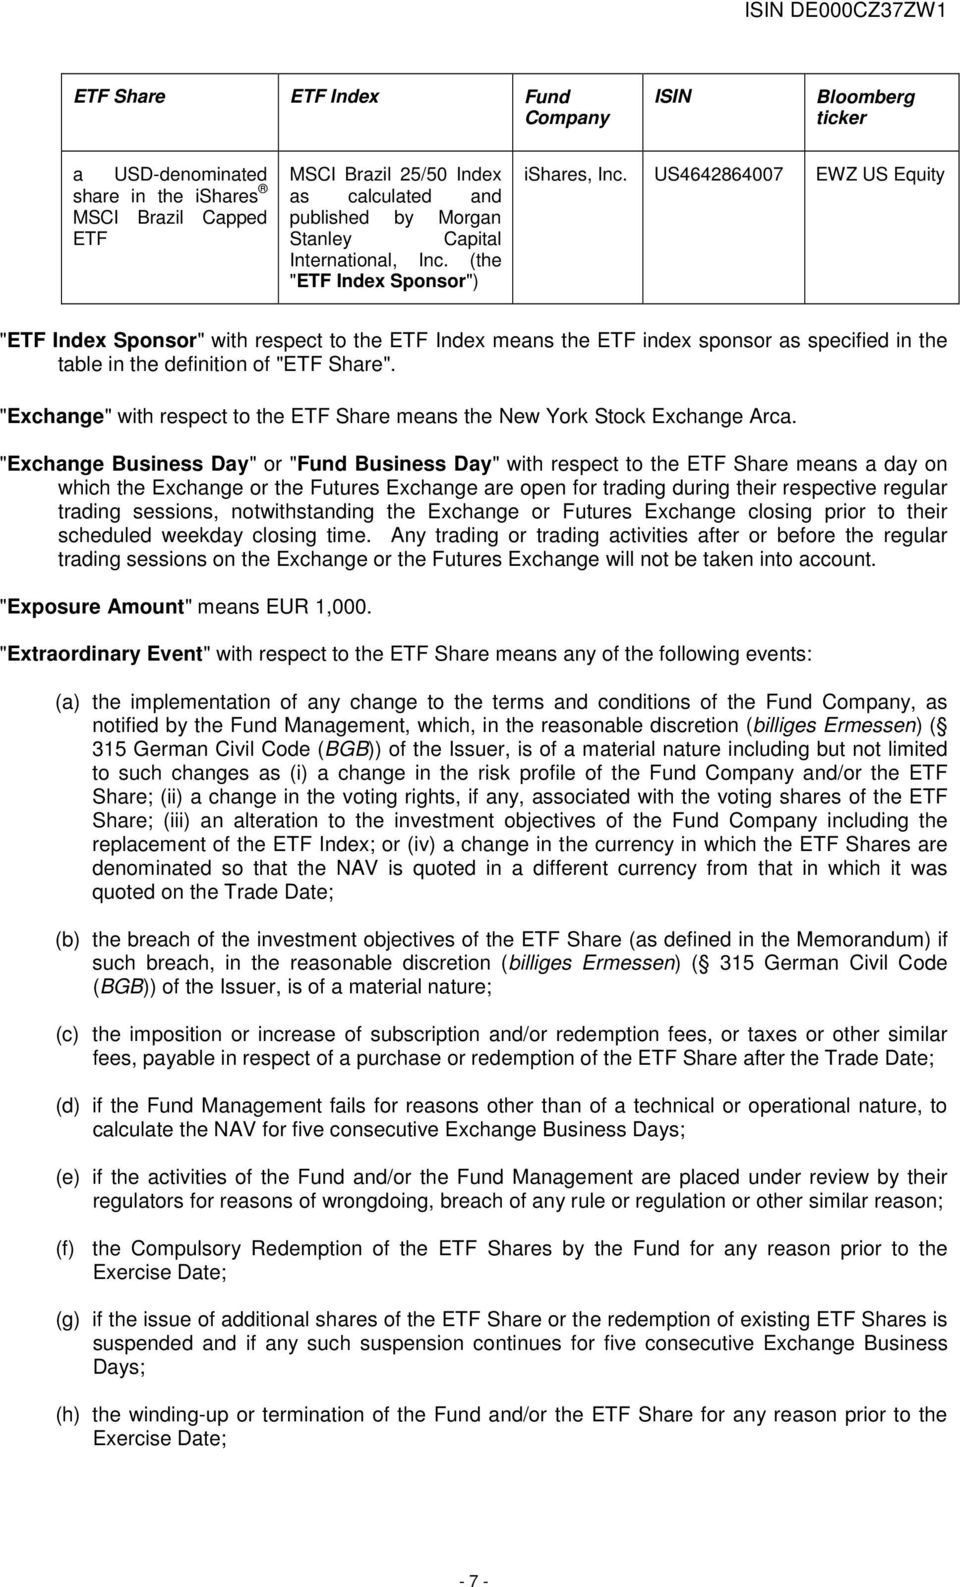 US4642864007 EWZ US Equity "ETF Index Sponsor" with respect to the ETF Index means the ETF index sponsor as specified in the table in the definition of "ETF Share".